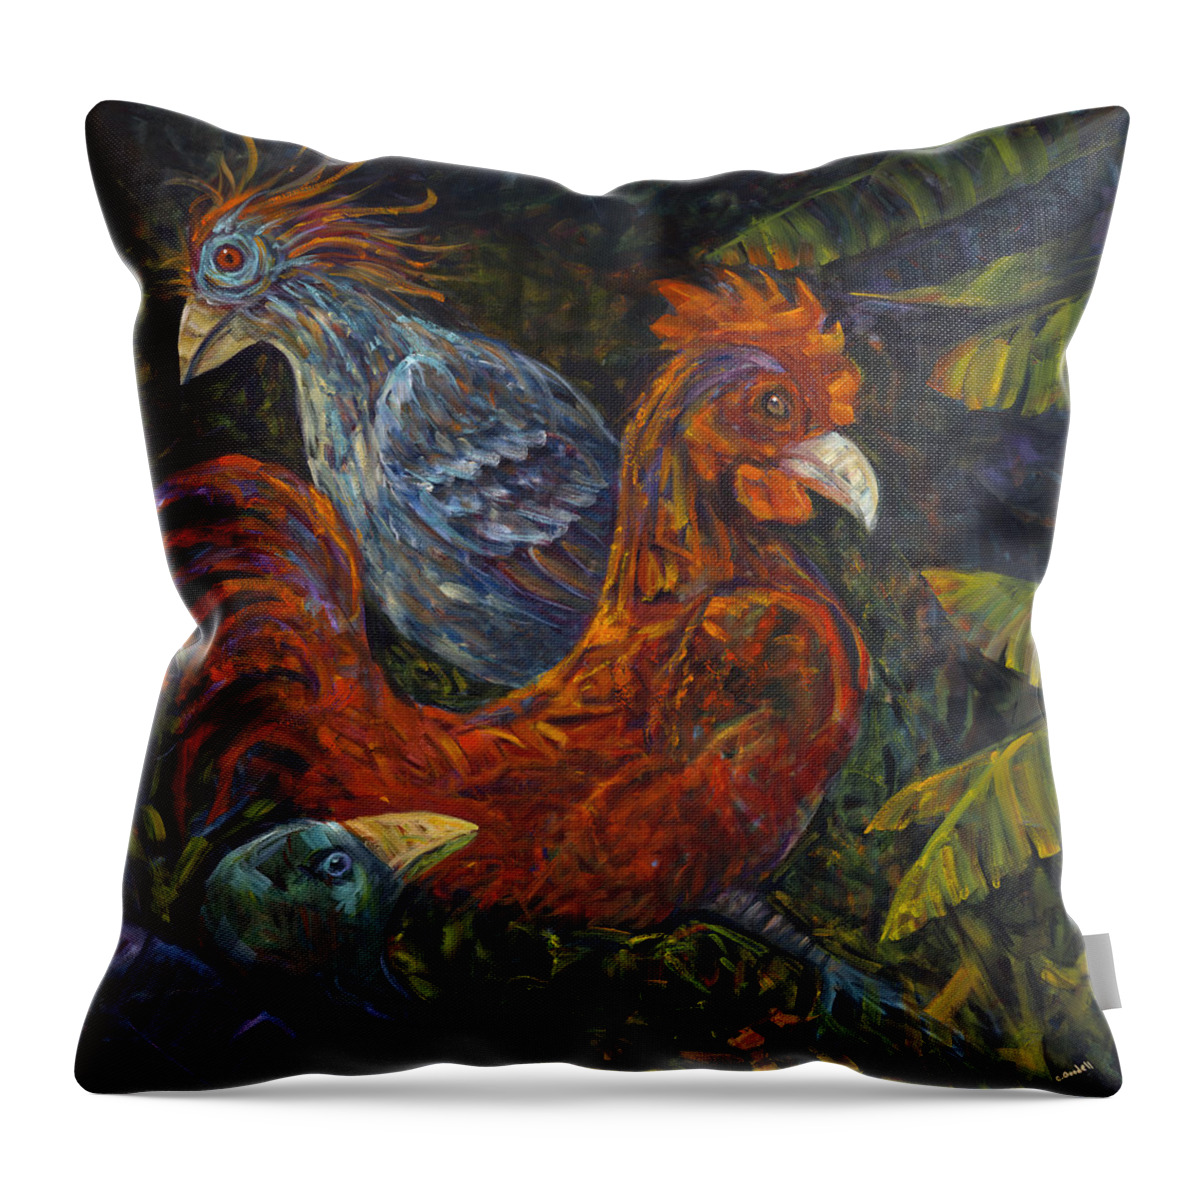 Bird Throw Pillow featuring the painting Birditudes by Claudia Goodell